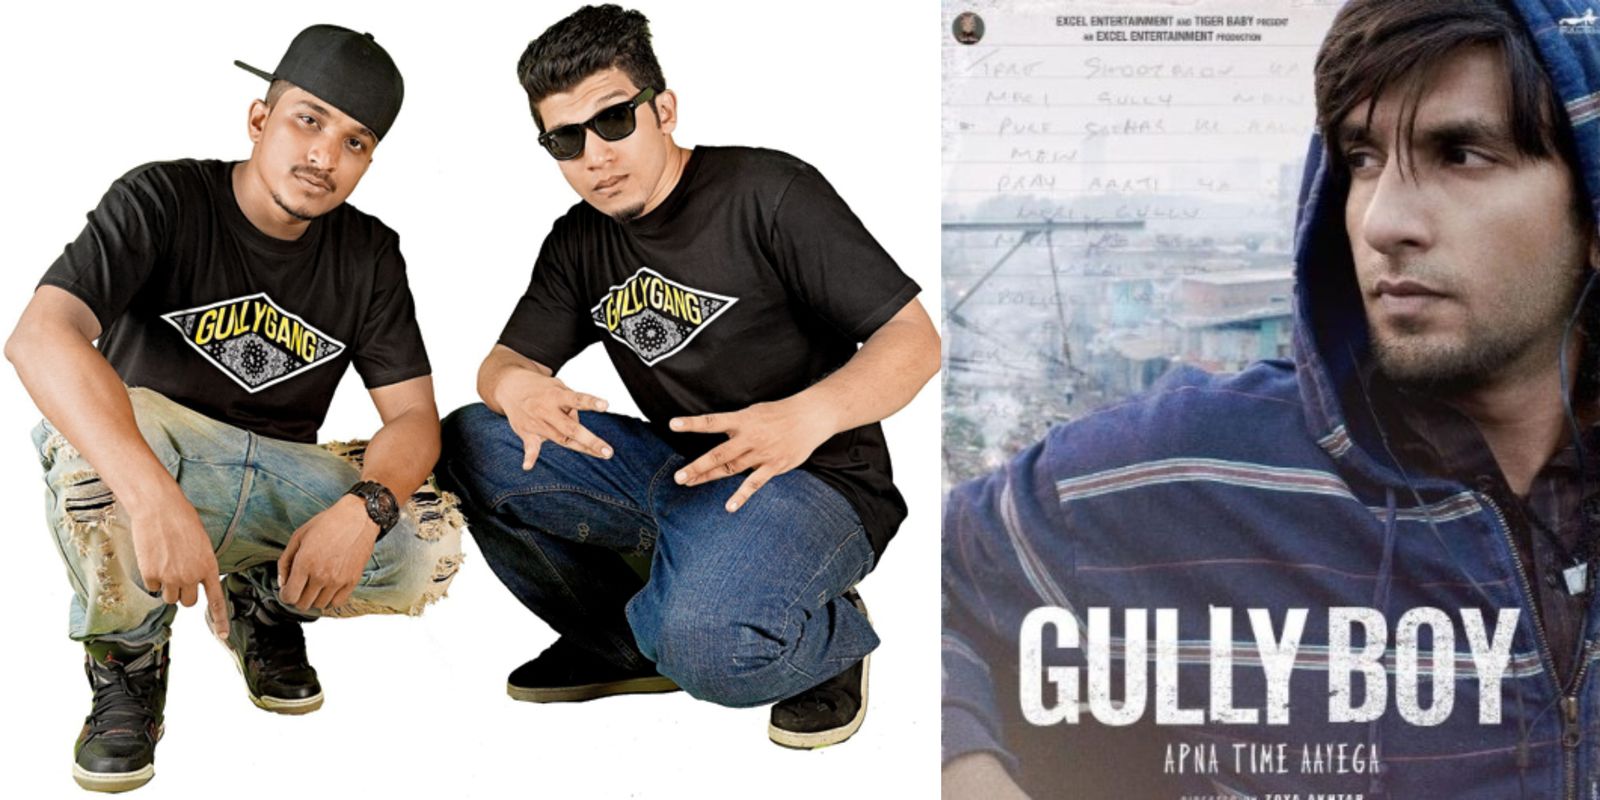 Take A Closer Look At The Lives Of Divine And Naezy, The Inspiration Behind Gully Boy!